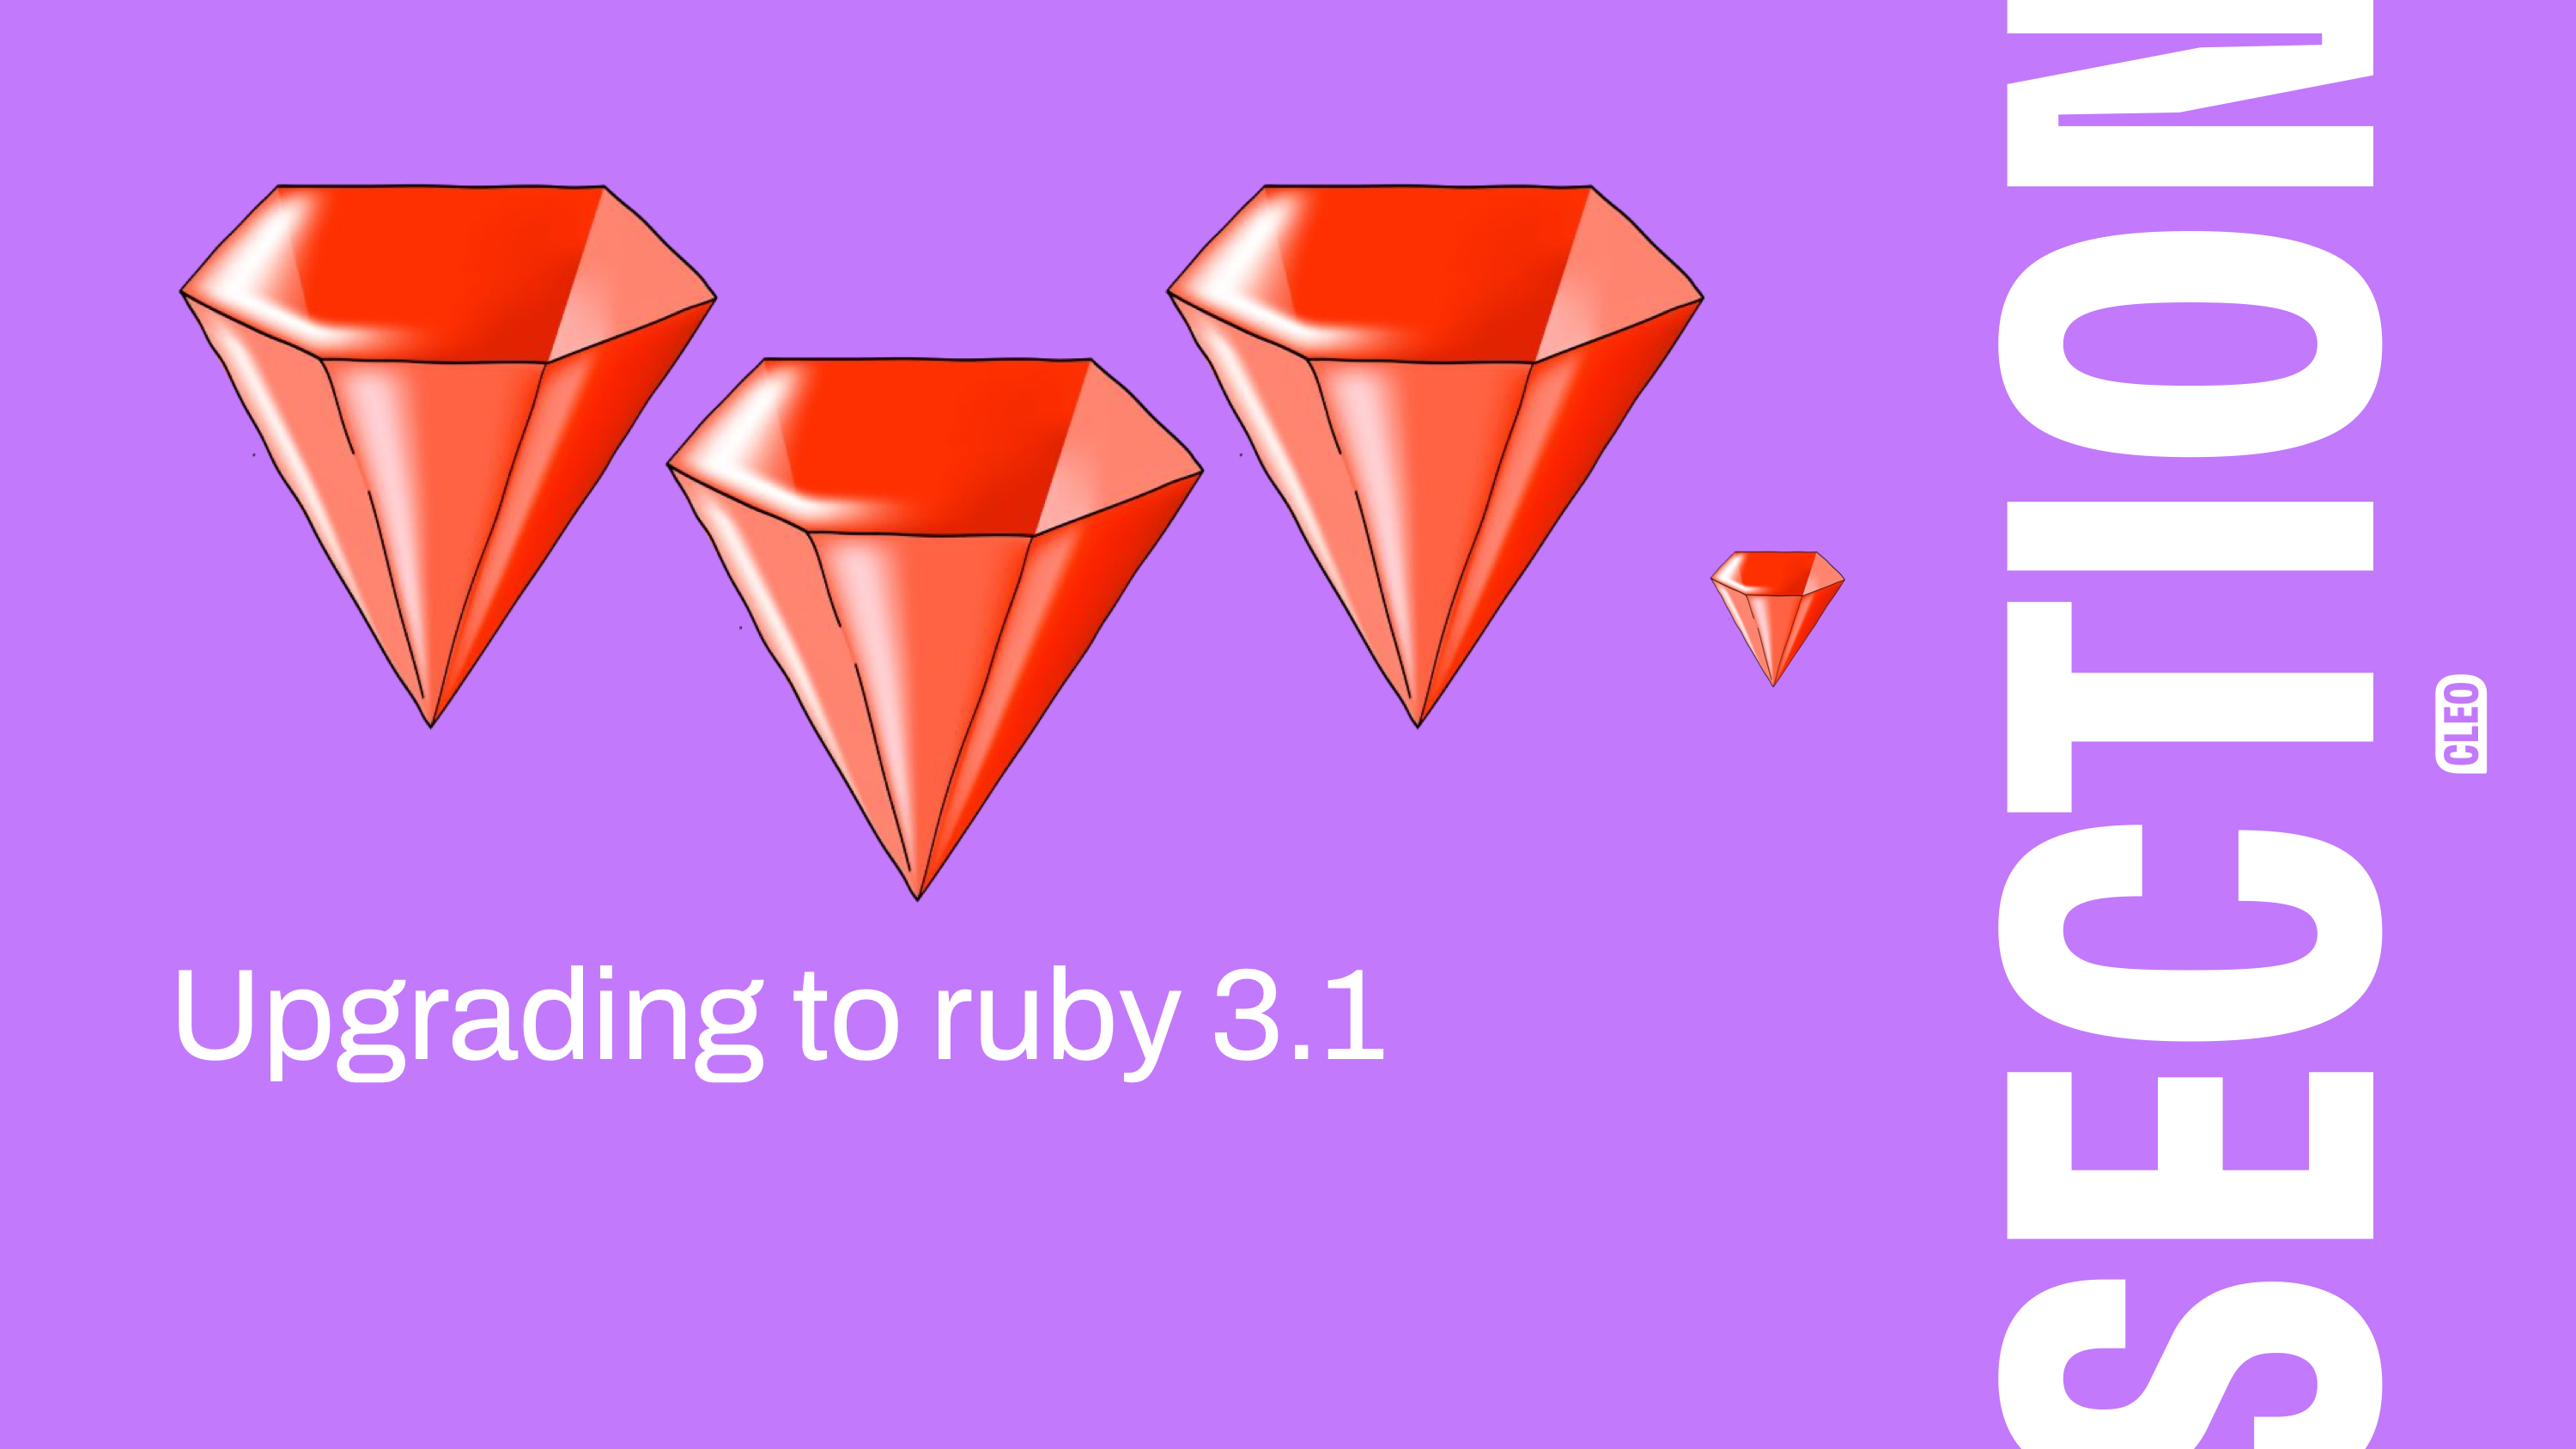 A section title for Upgrading to ruby 3.1; three large rubys and one small one float above the title; text: Upgrading to ruby 3.1